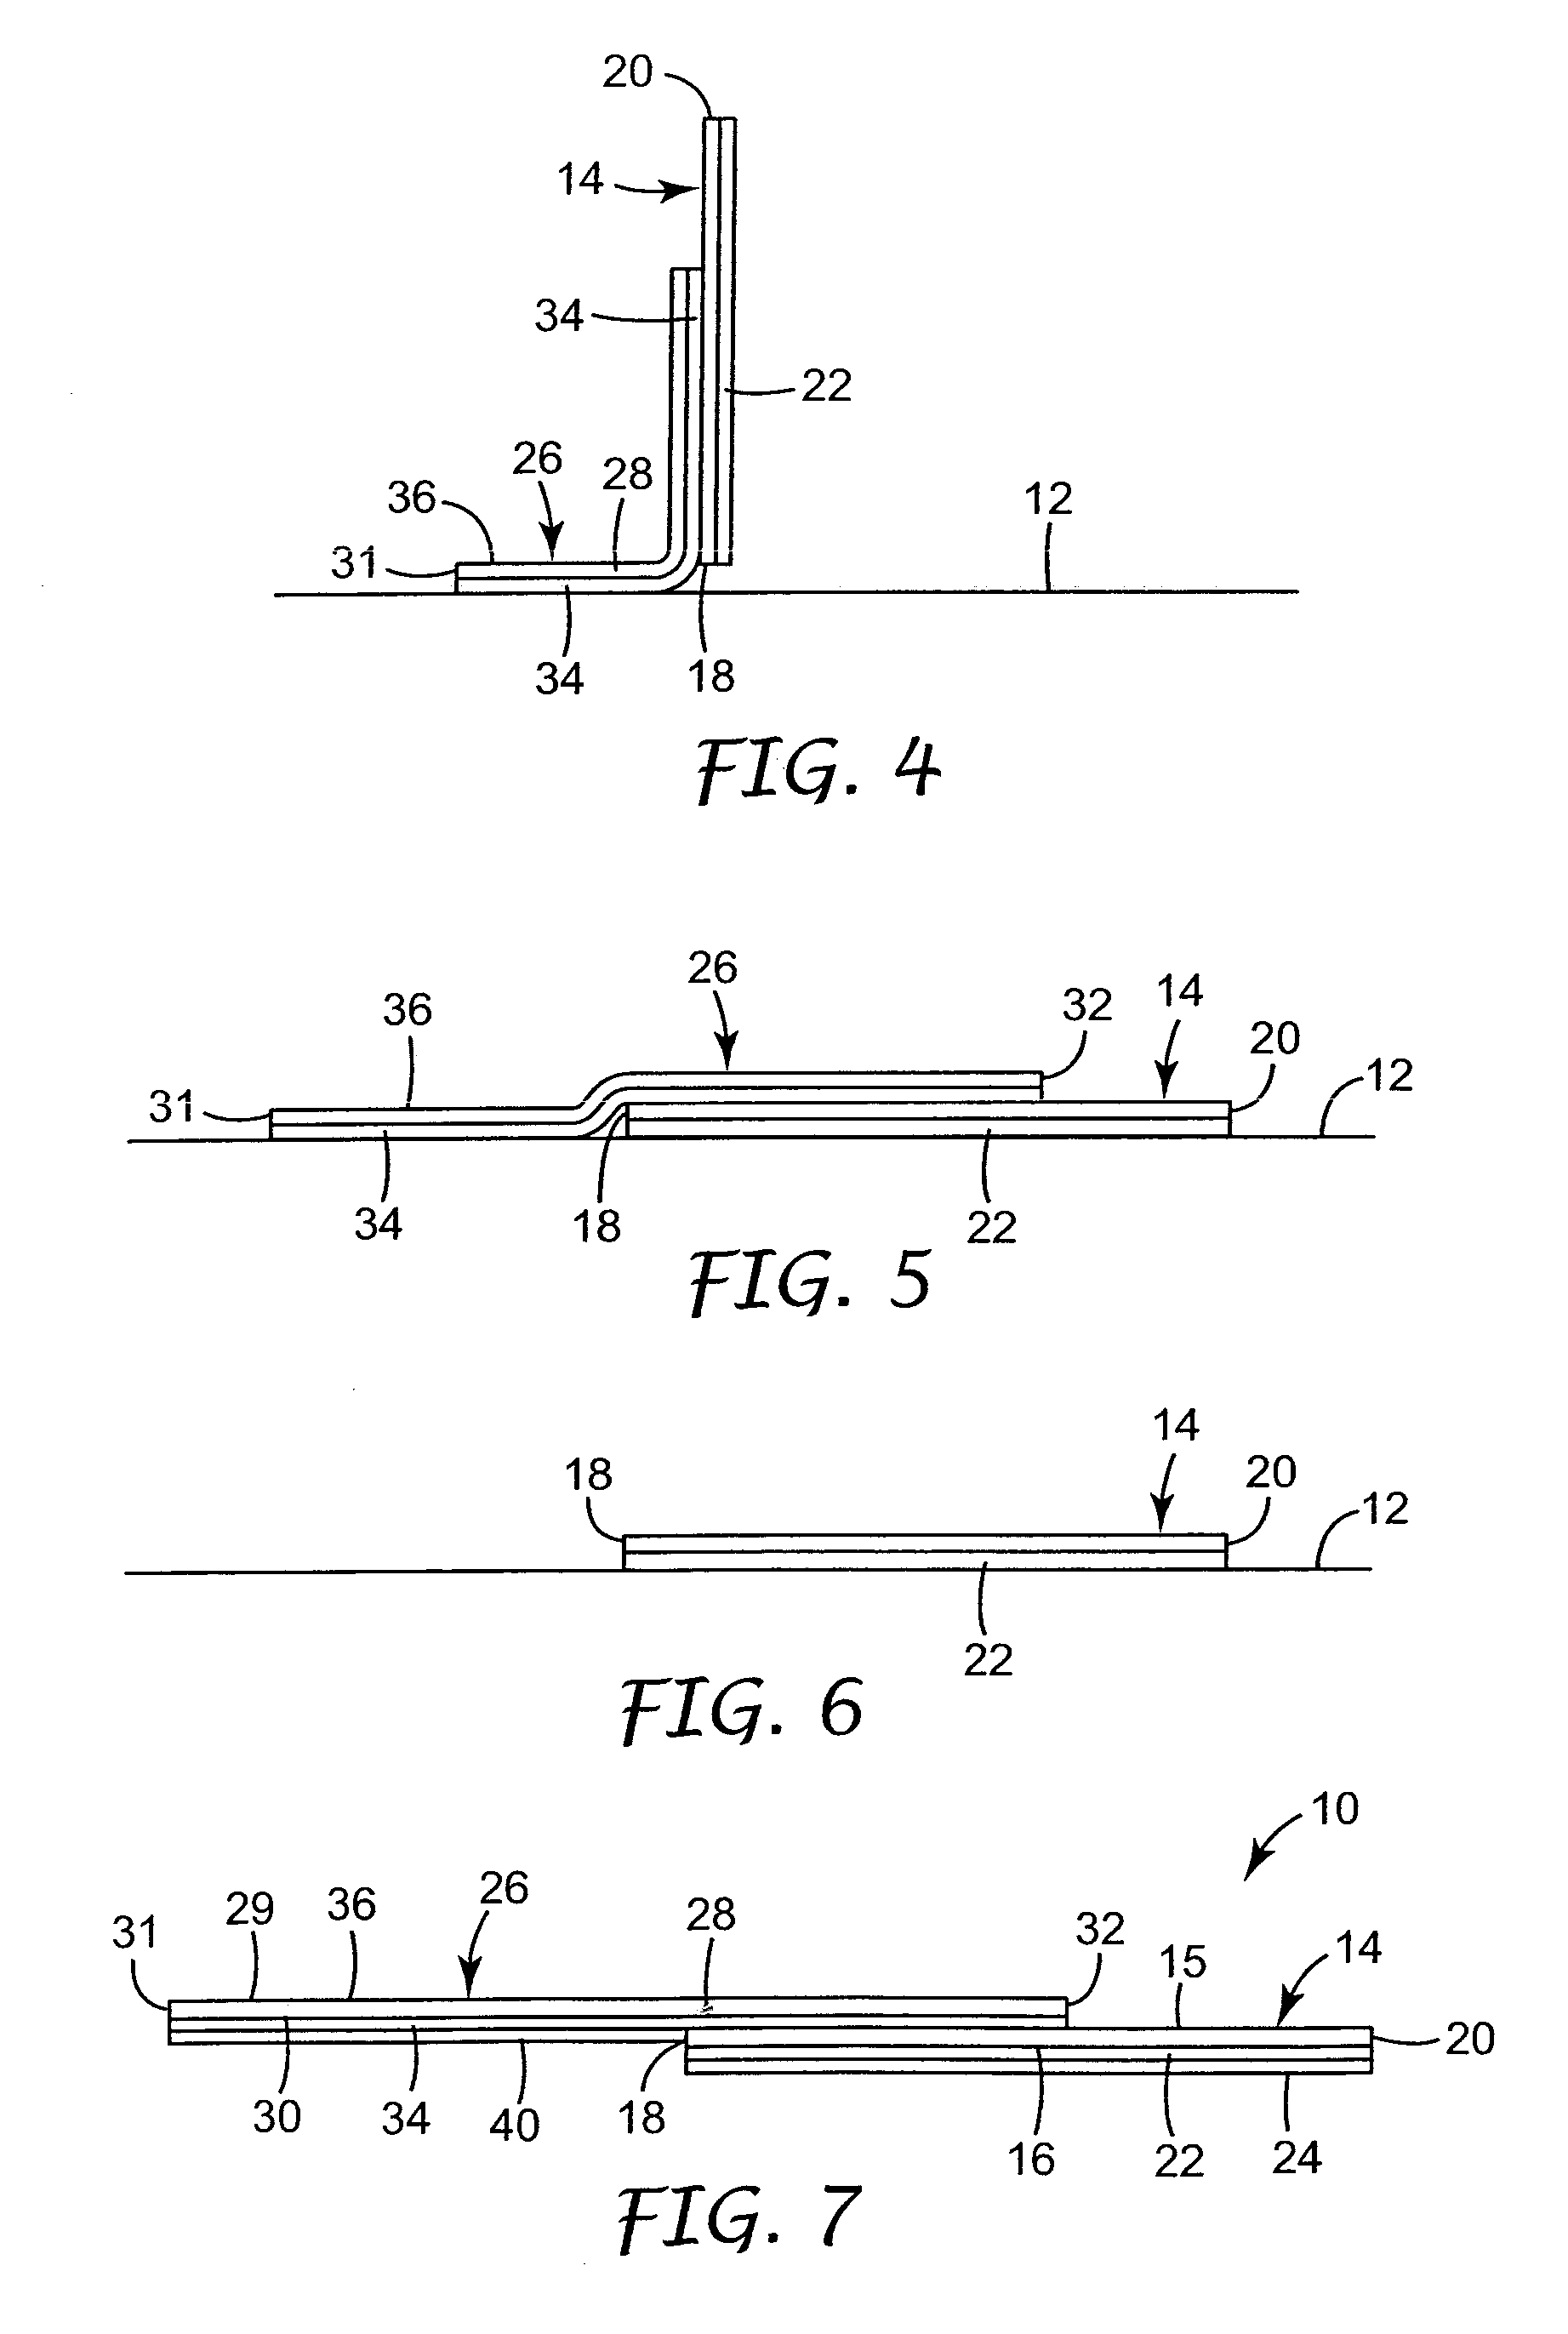 Laminate and method used for applying a design to a substrate